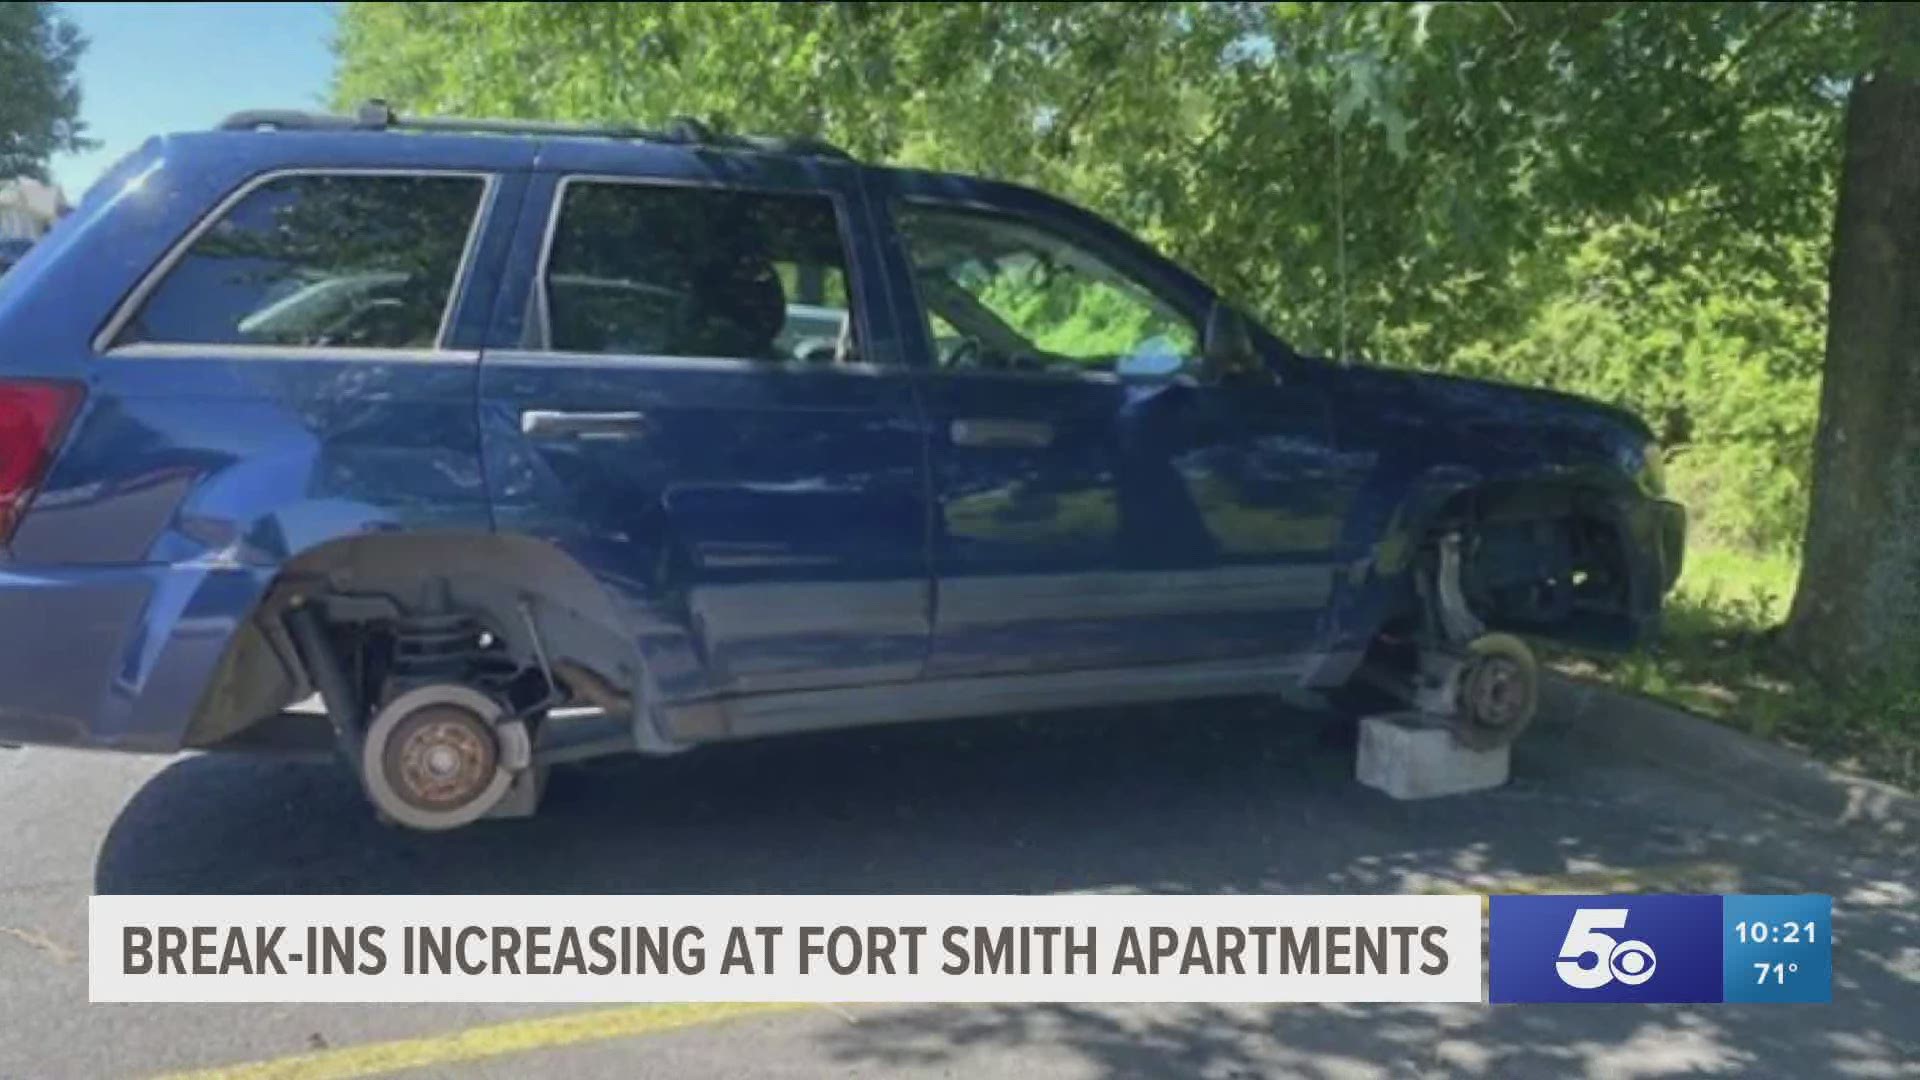 Residents at The Links in Fort Smith are taking action to help prevent future theft.